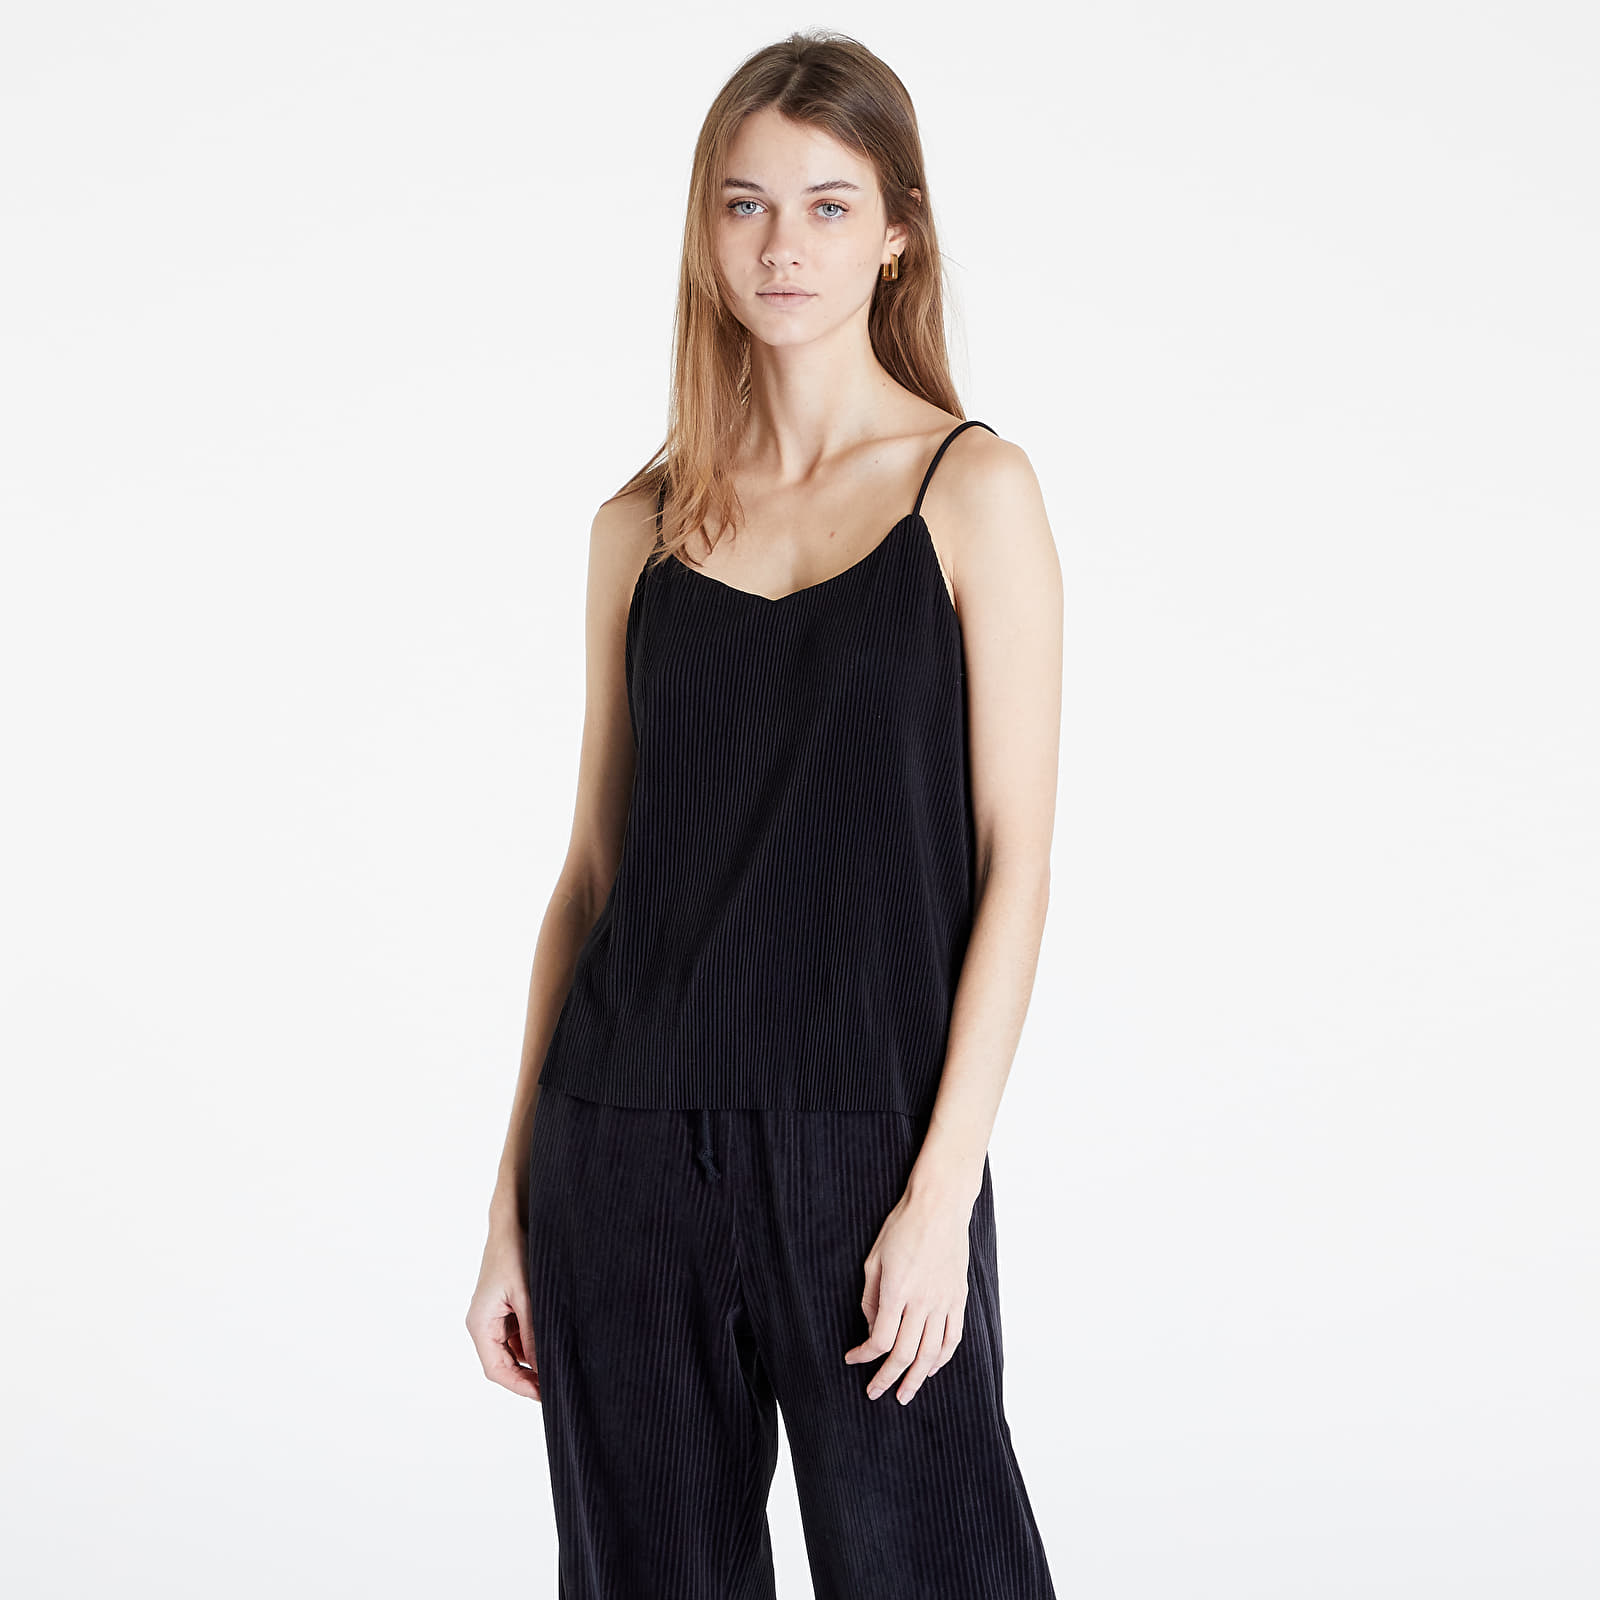 Maiouri SELECTED Carrie Strap Top Black